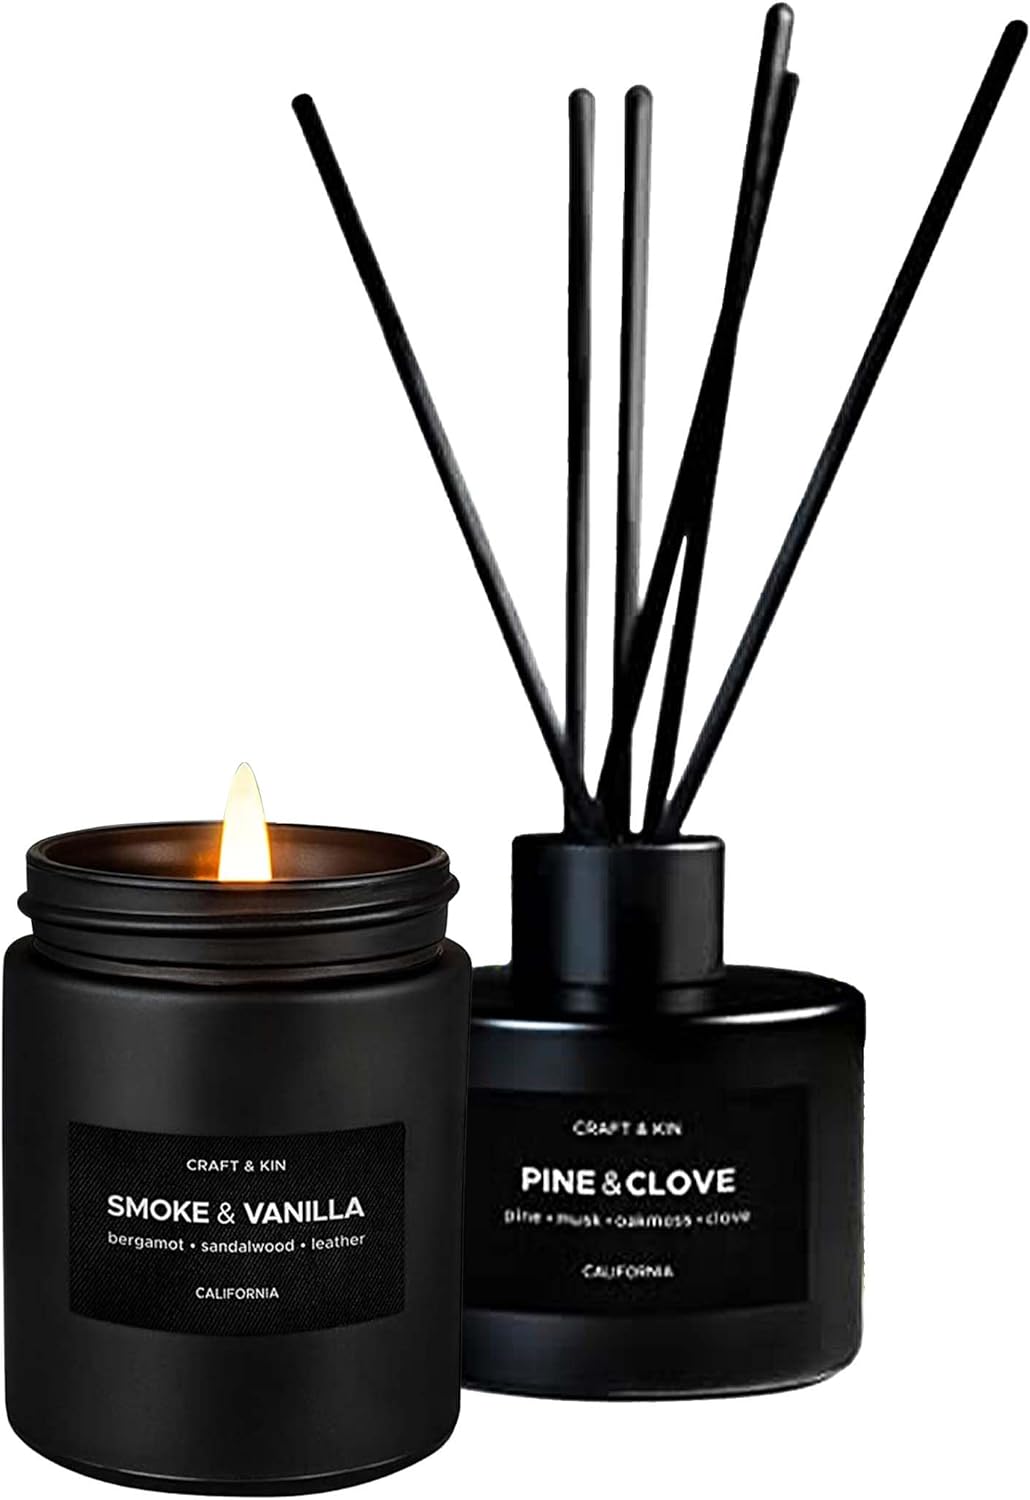 Craft & Kin Scented Candle & Reed Diffuser Set for Home Fragrance | Lavender Woods Scented Candle for Men and Fragrance Diffuser | Soy Candles for Home Scented Reed Diffusers with Sticks